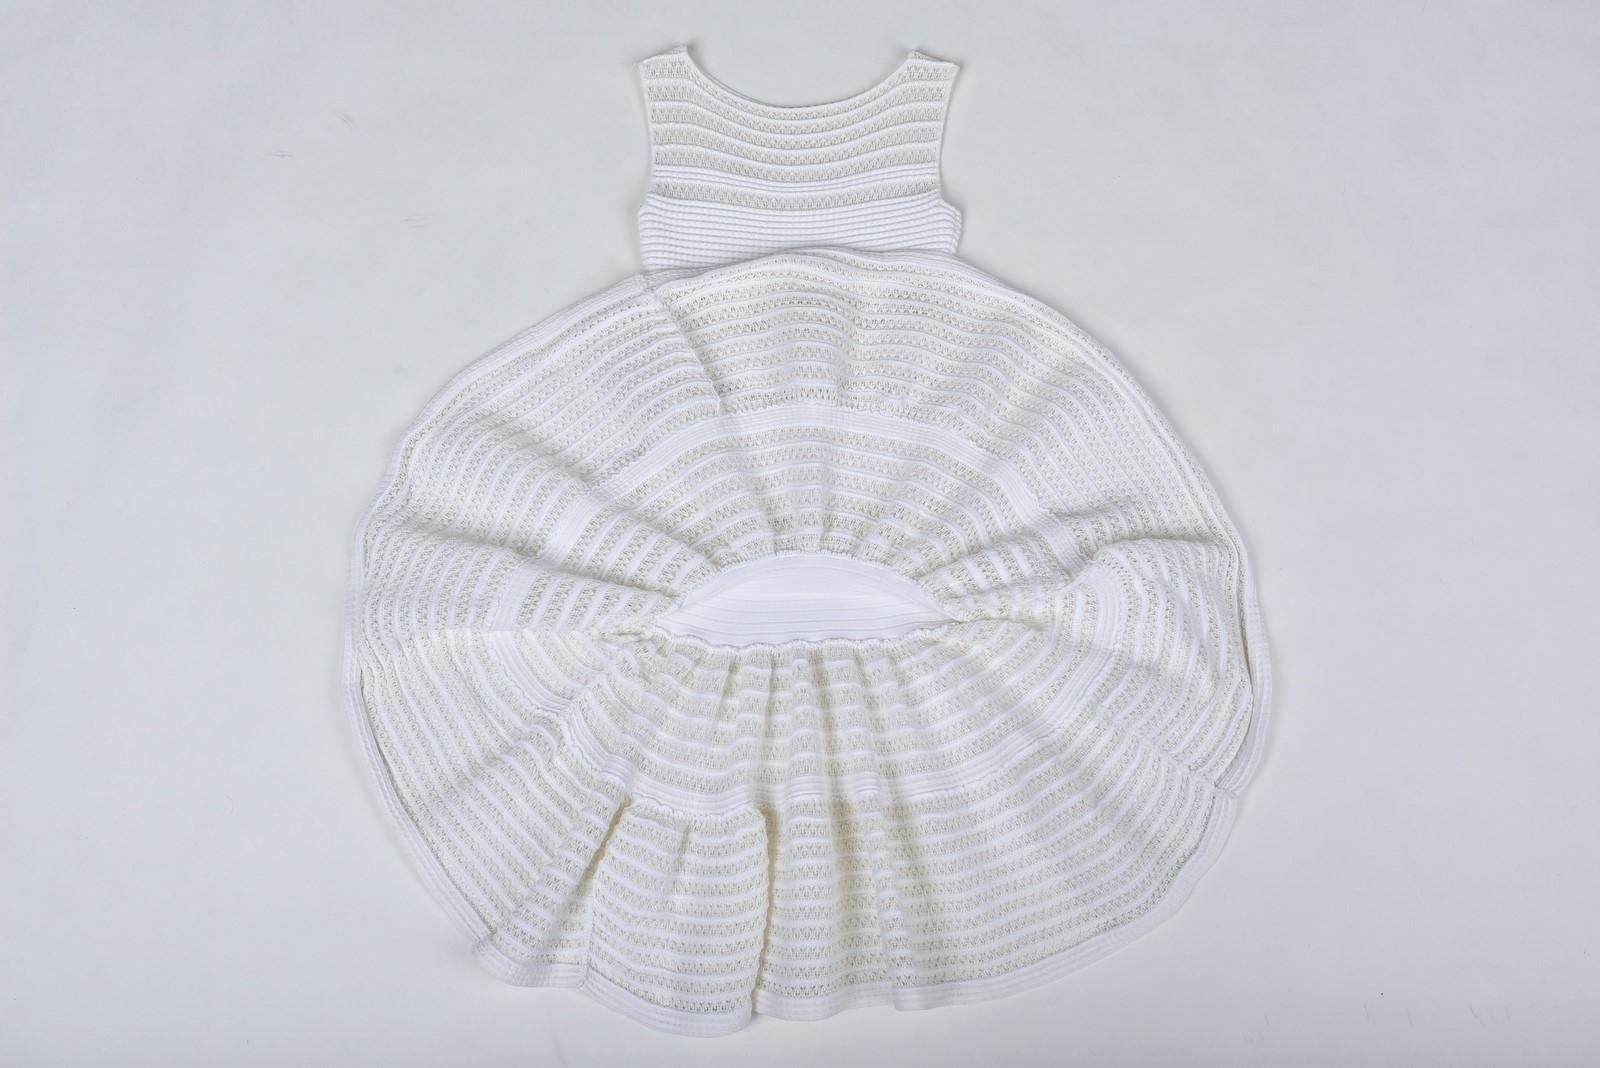 Circa 2000

France

Little white stretch dress by Azzedine Alaïa dating from the 2000s. Iconic sleeveless mini-dress, boat neckline in polyamide and cotton with lace interlacing sculpting the silhouette. Zip on the side and effect blousant of the